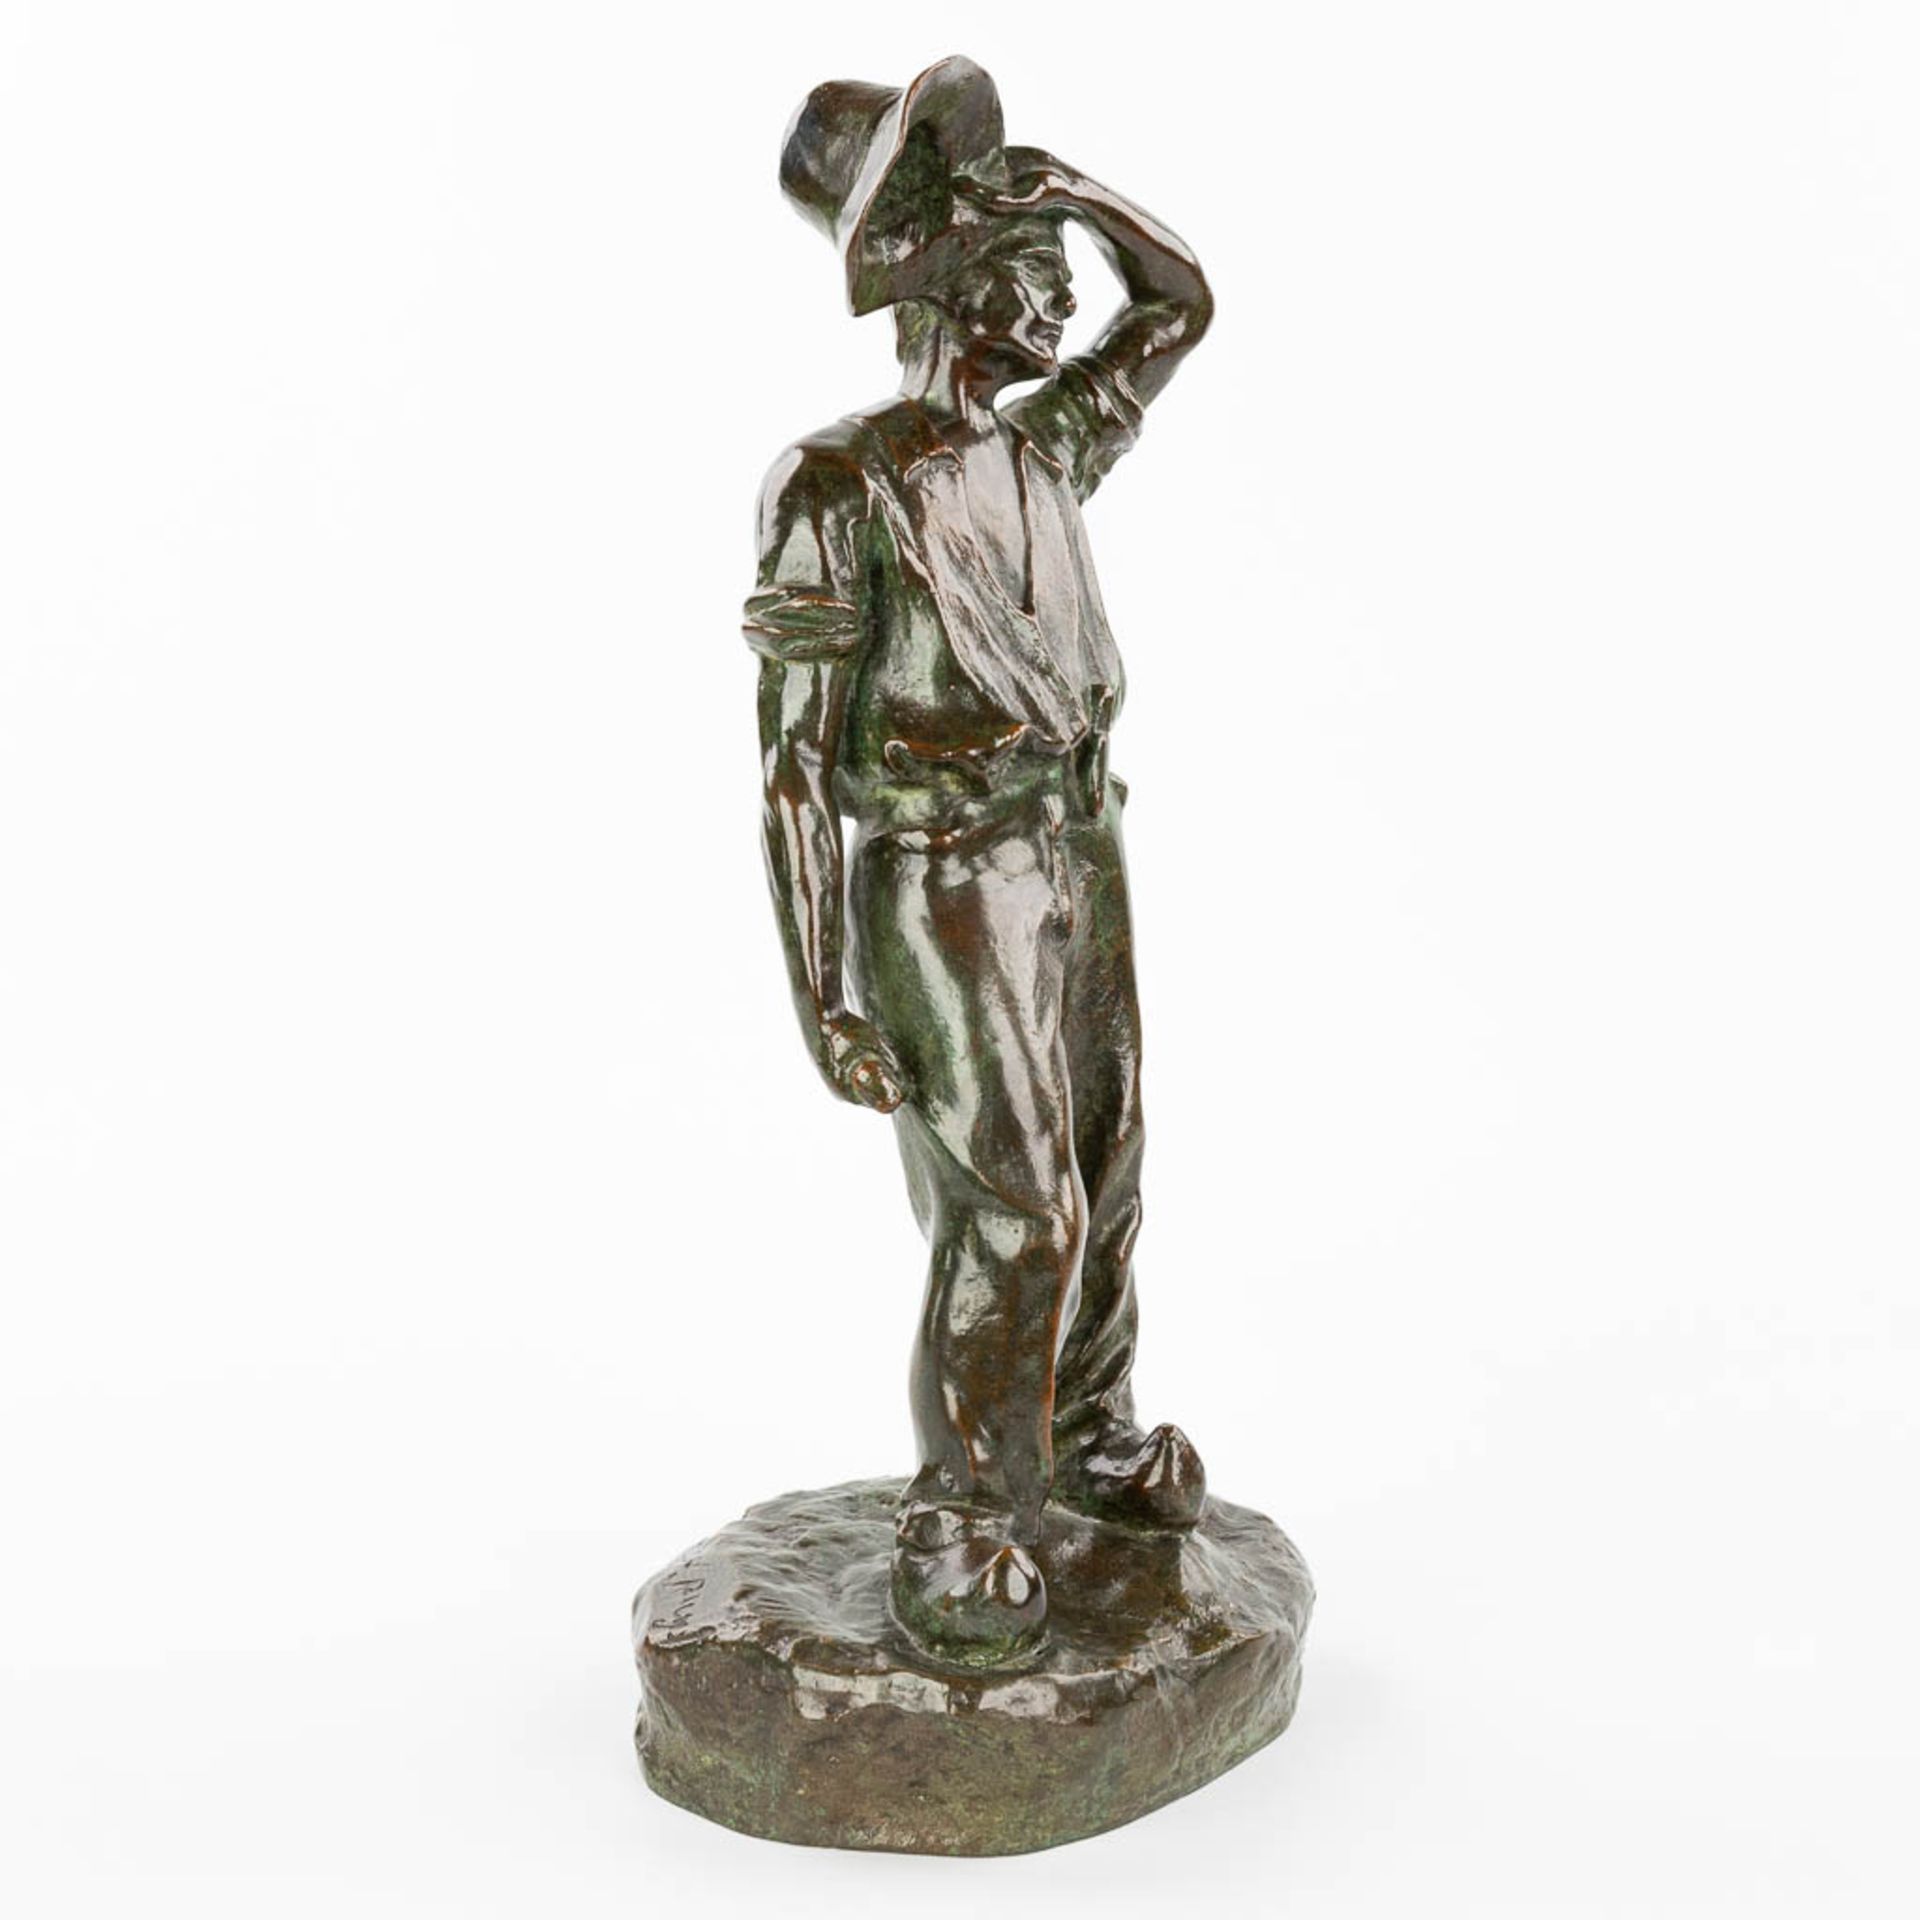 Arthur PUYT (1873-1955) 'Man with the hat', patinated bronze. (H:40cm) - Image 3 of 10